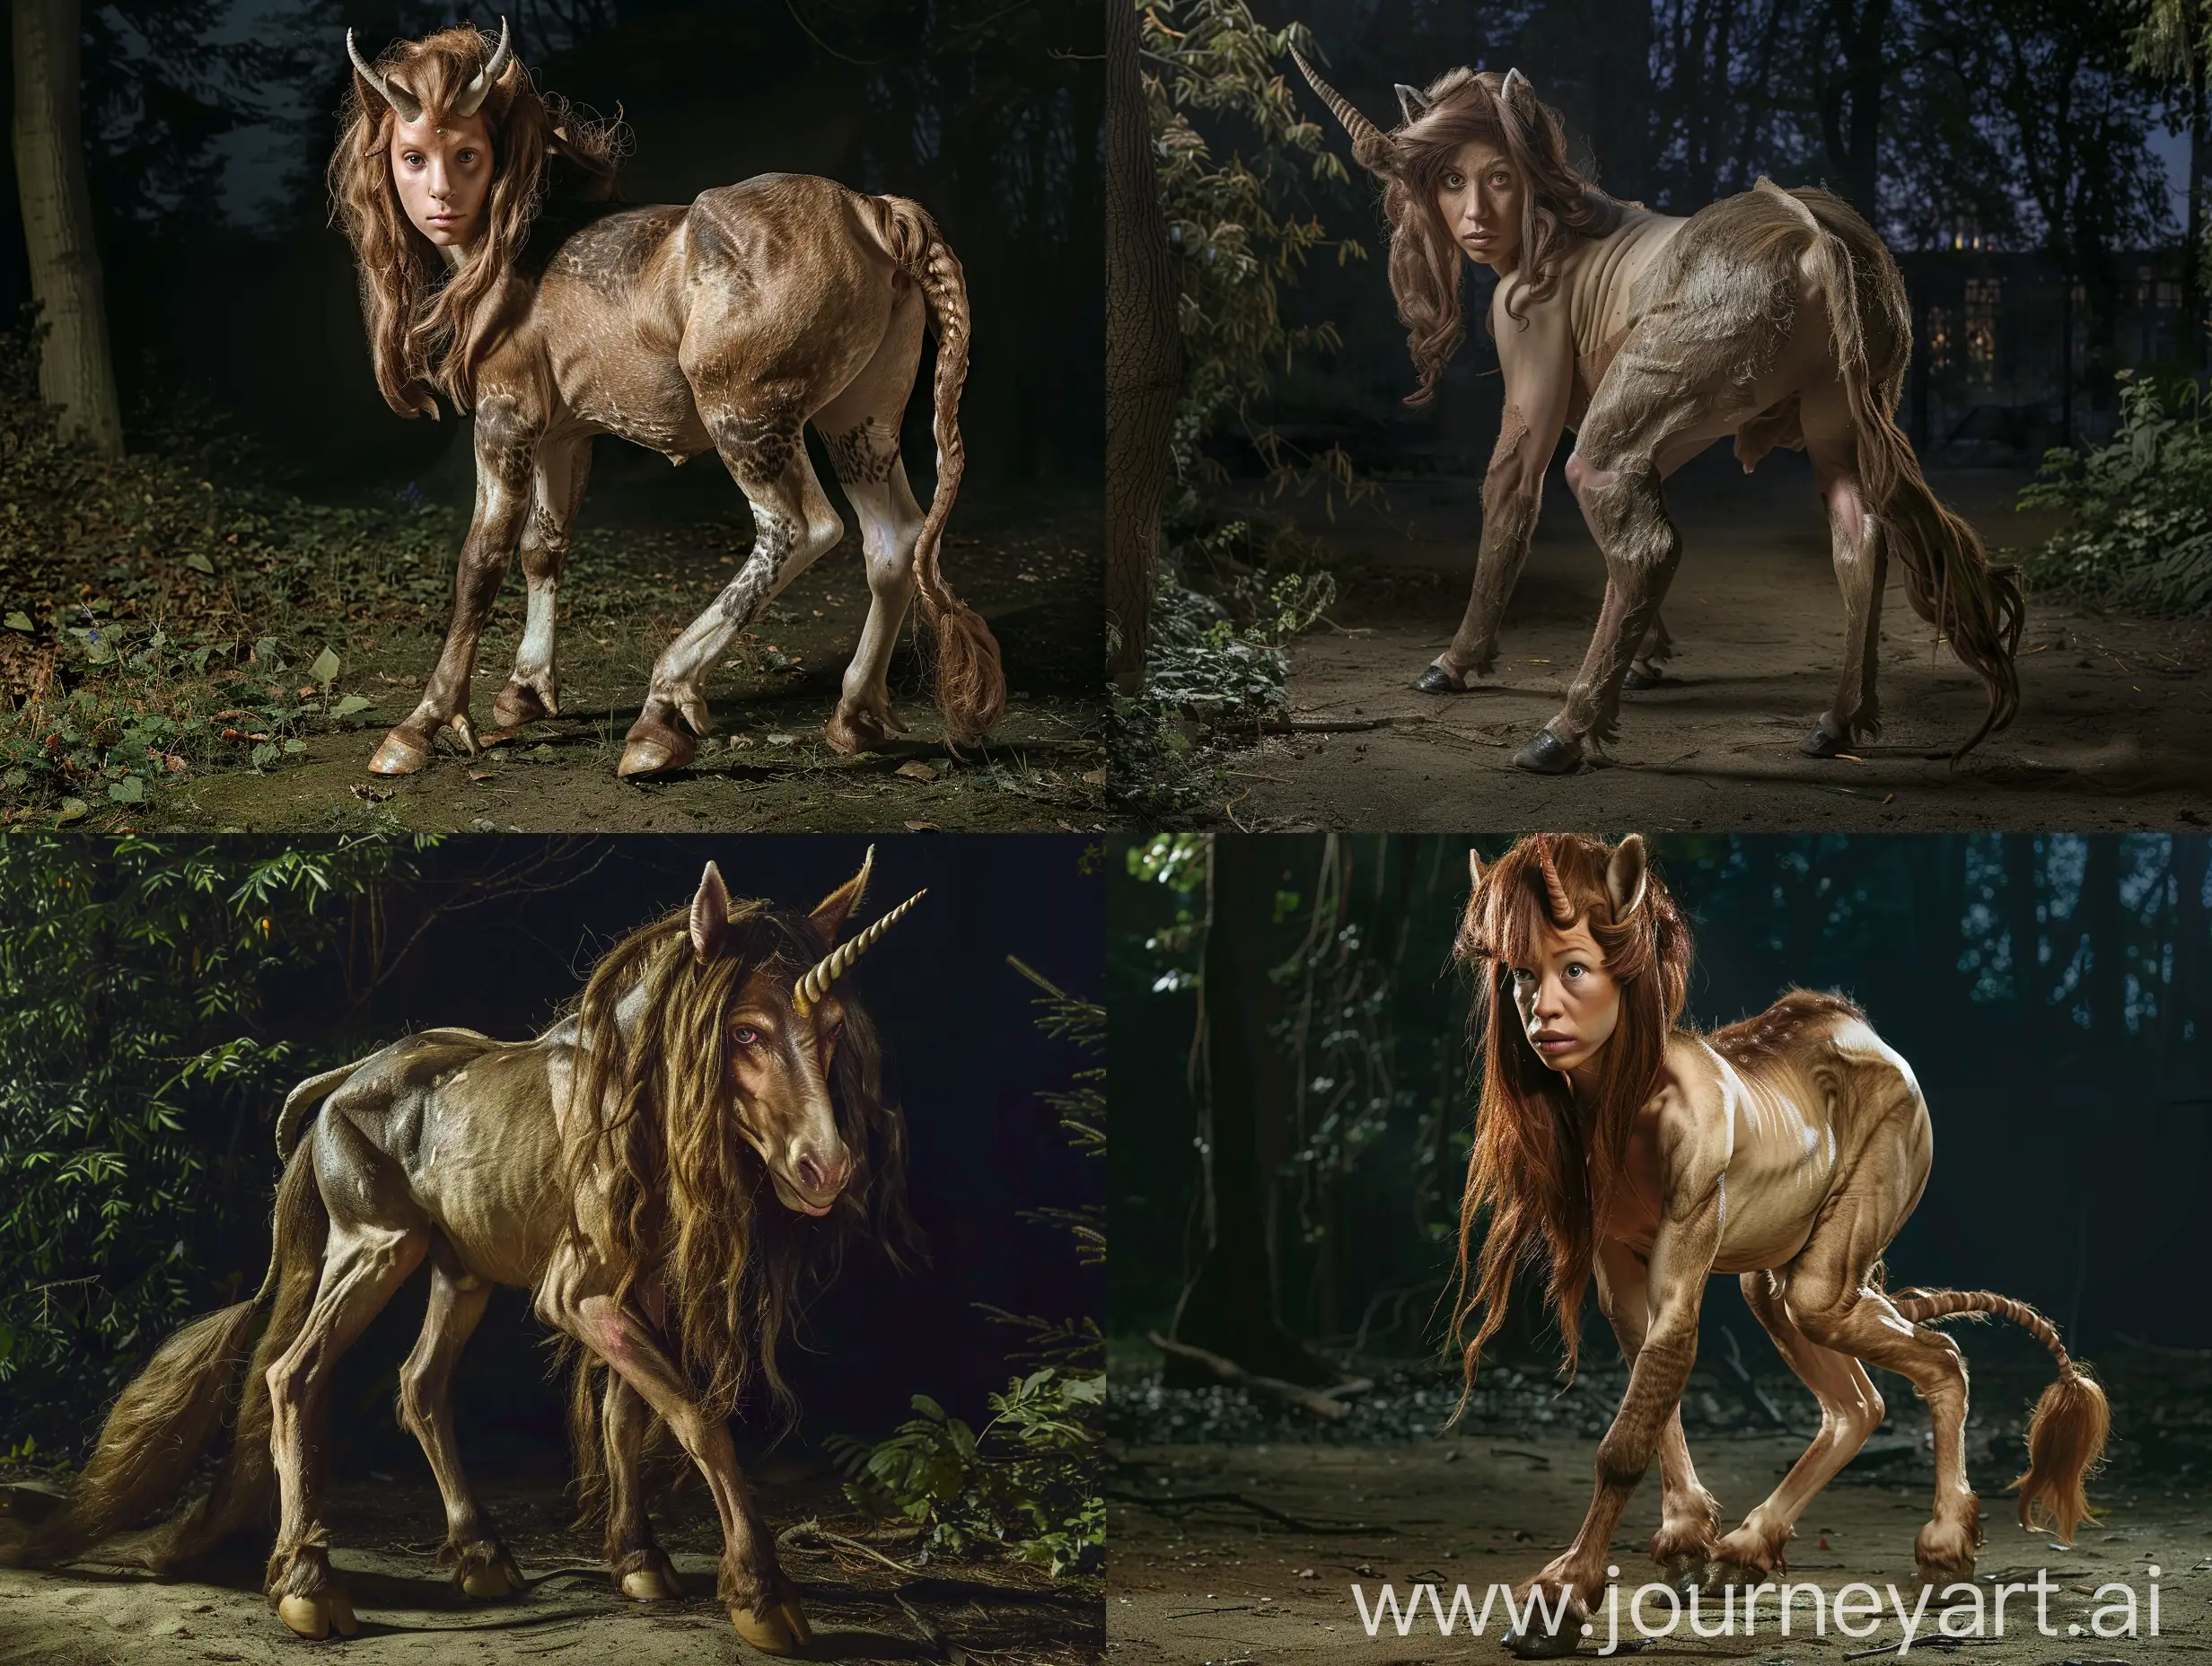 A female centaur. She has hooves and a tail. She has loose brown hair. She is standing on all fours in a forest at night. Realistic photograph, full body picture